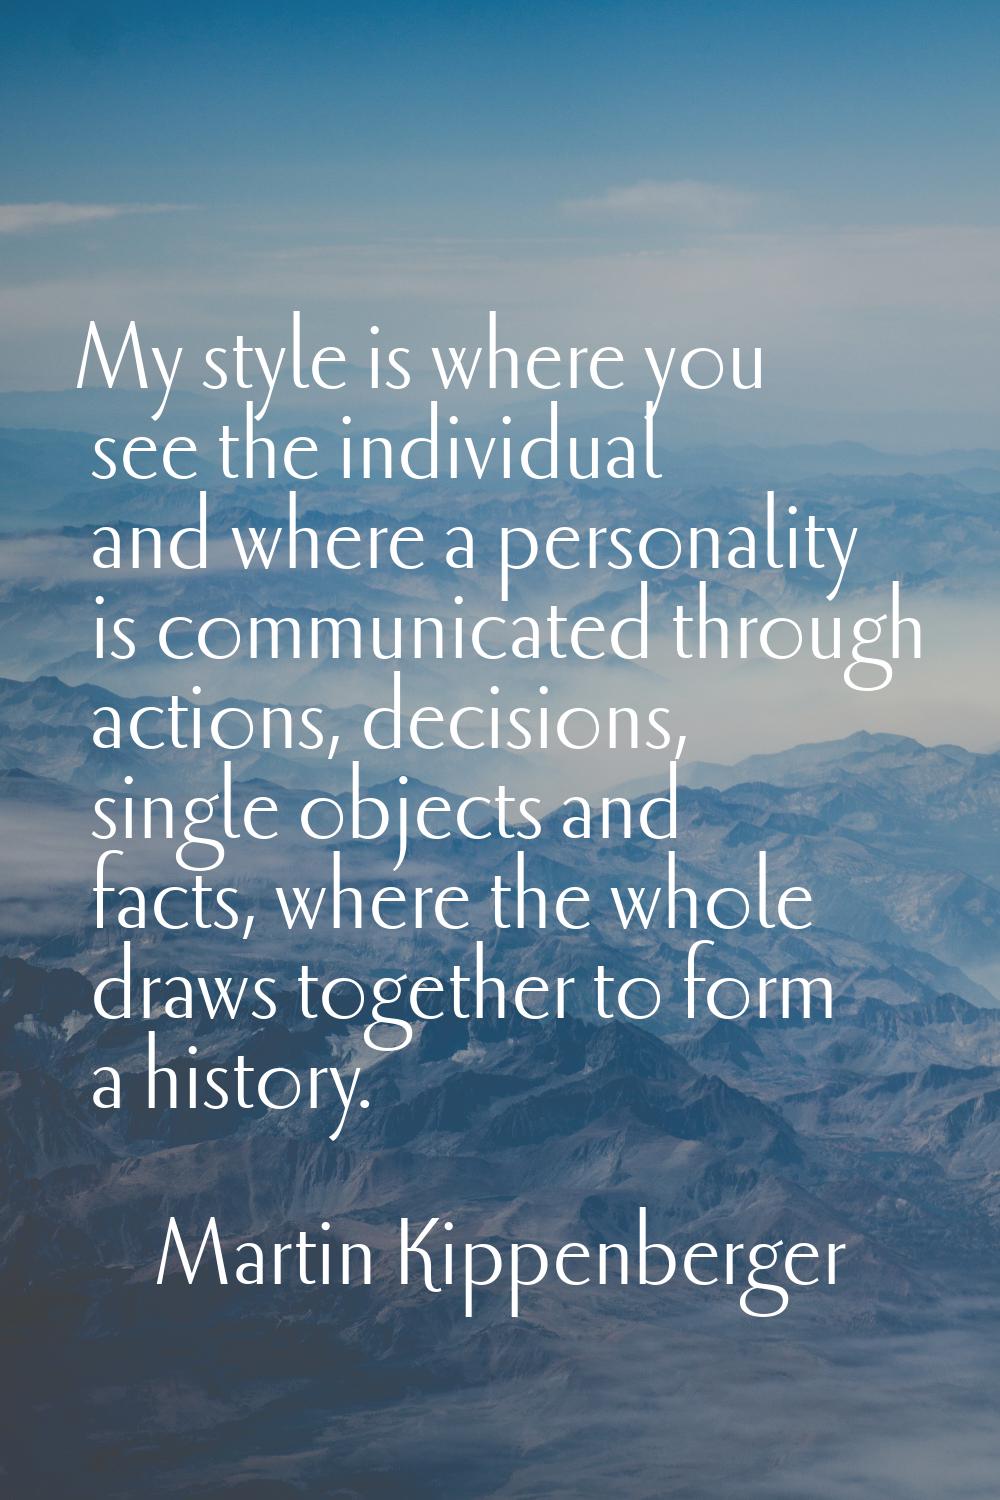 My style is where you see the individual and where a personality is communicated through actions, d